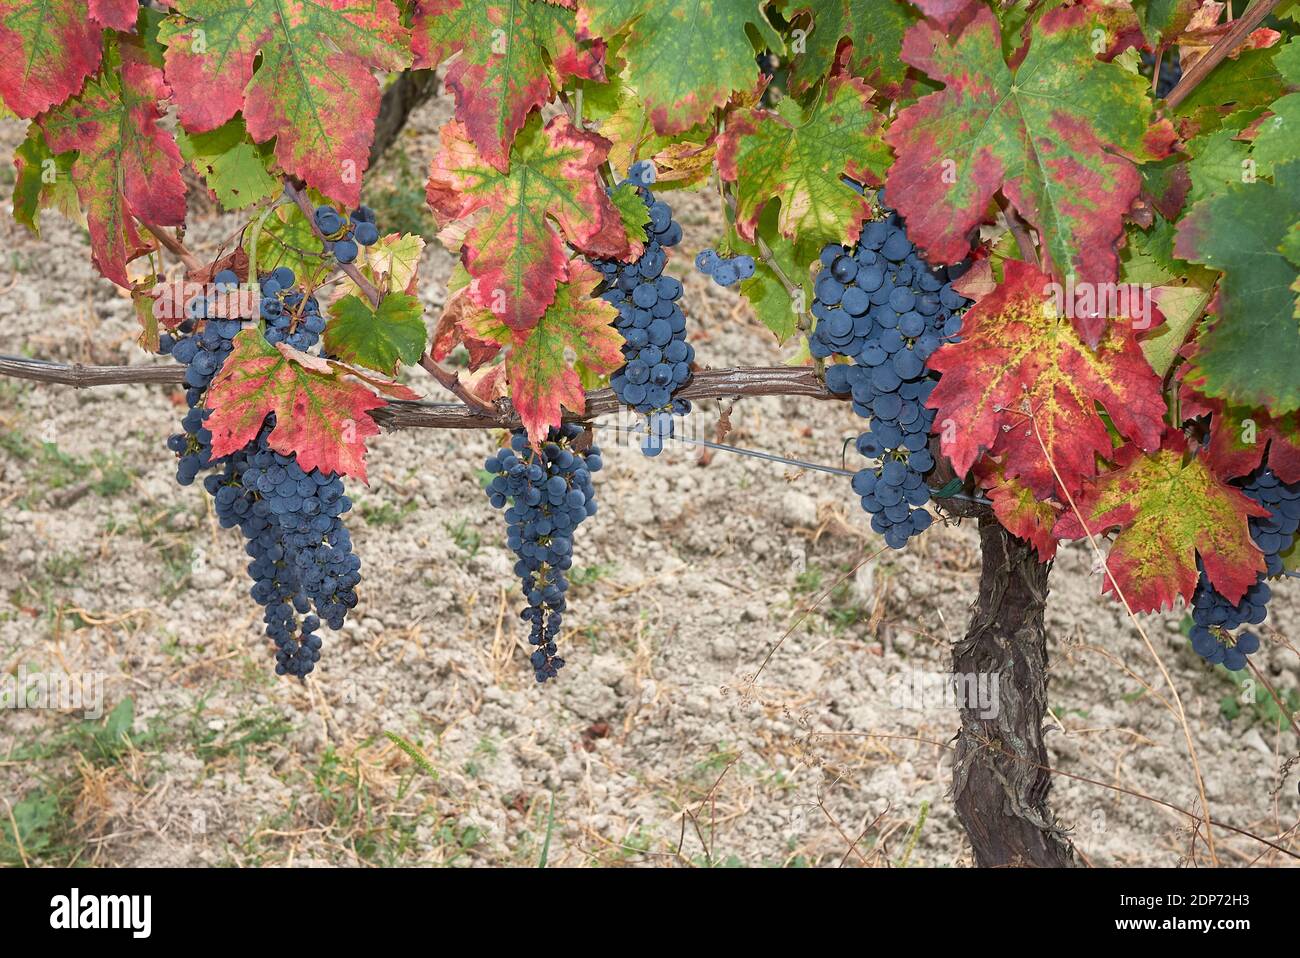 ripe bunches in a vineyard Stock Photo